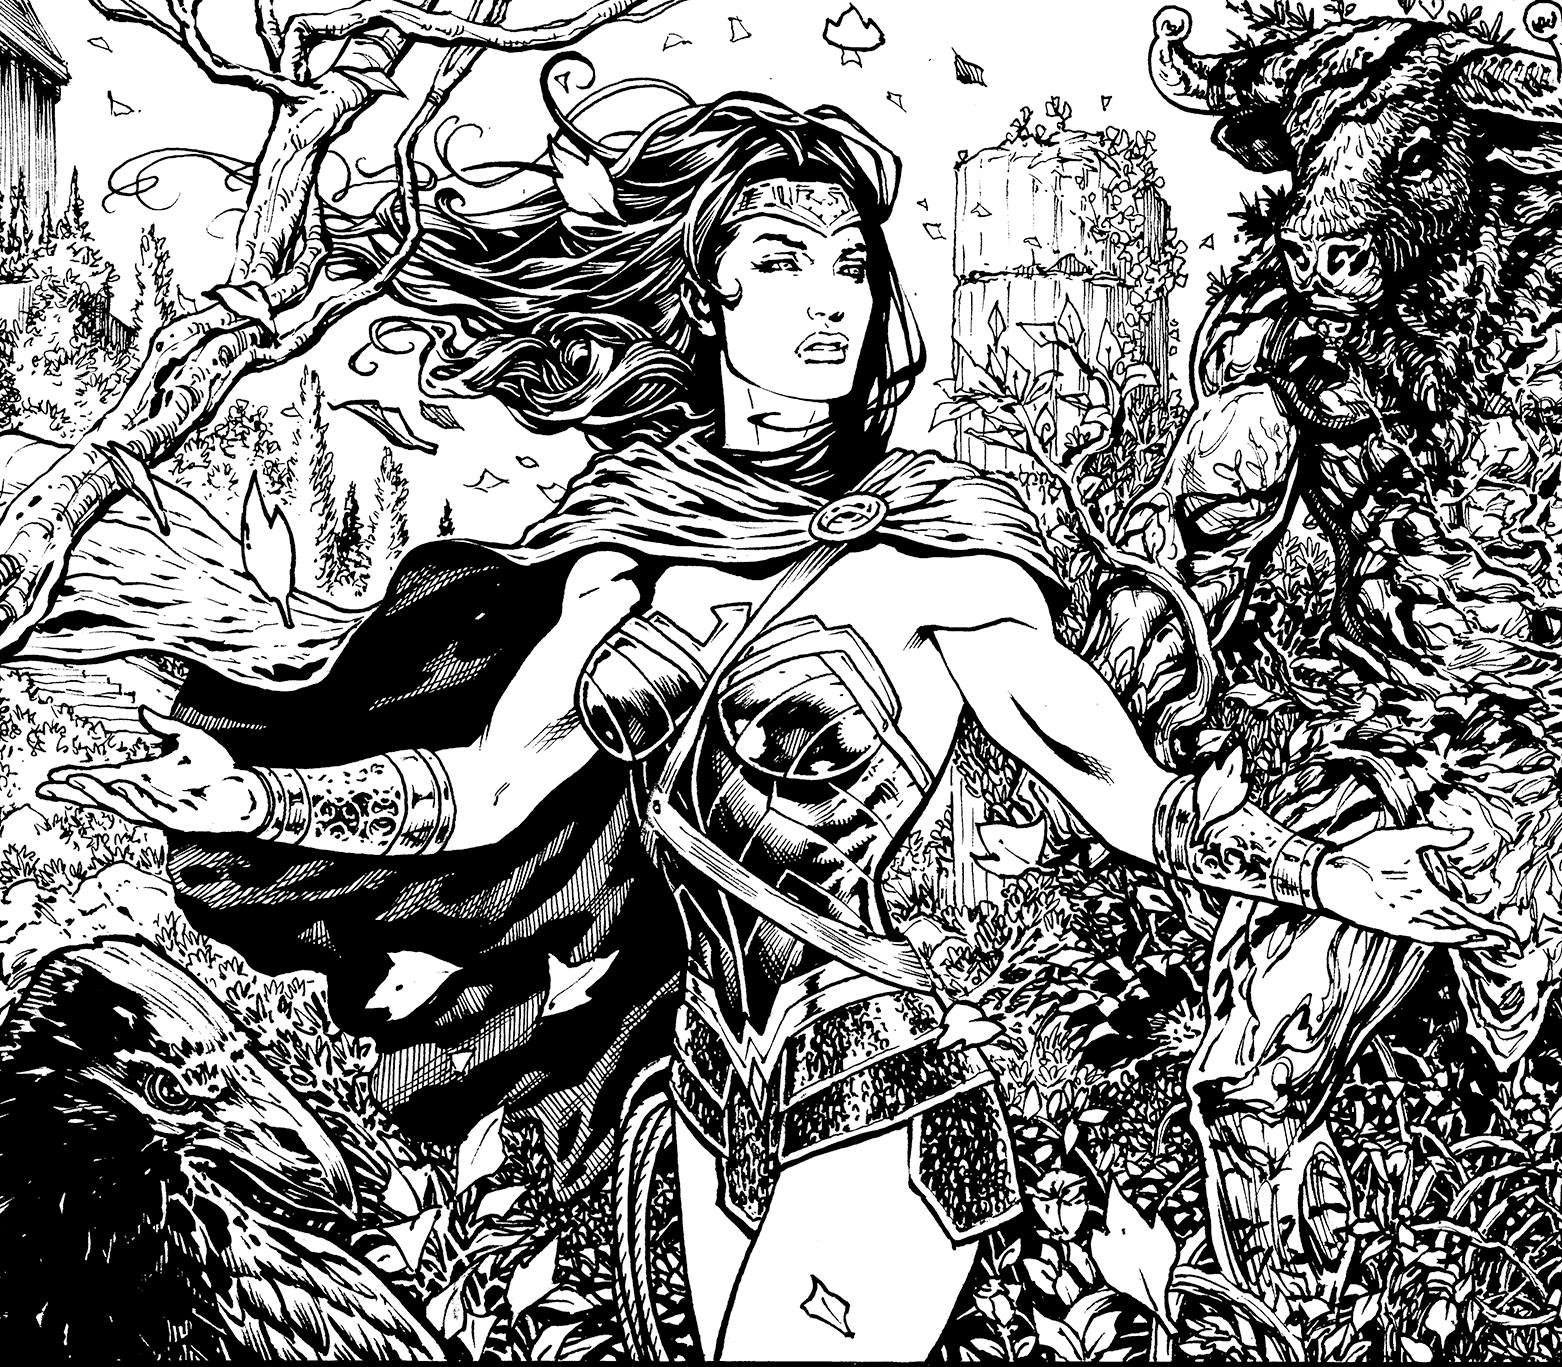 A crop of a panel from one of Liam's first batch of pages from the 'Rebirth' Wonder Woman. "I'm having an absolute ball with this," says the former Marvel UK artist and current Madefire digital comics exec. Wonder Woman © DC